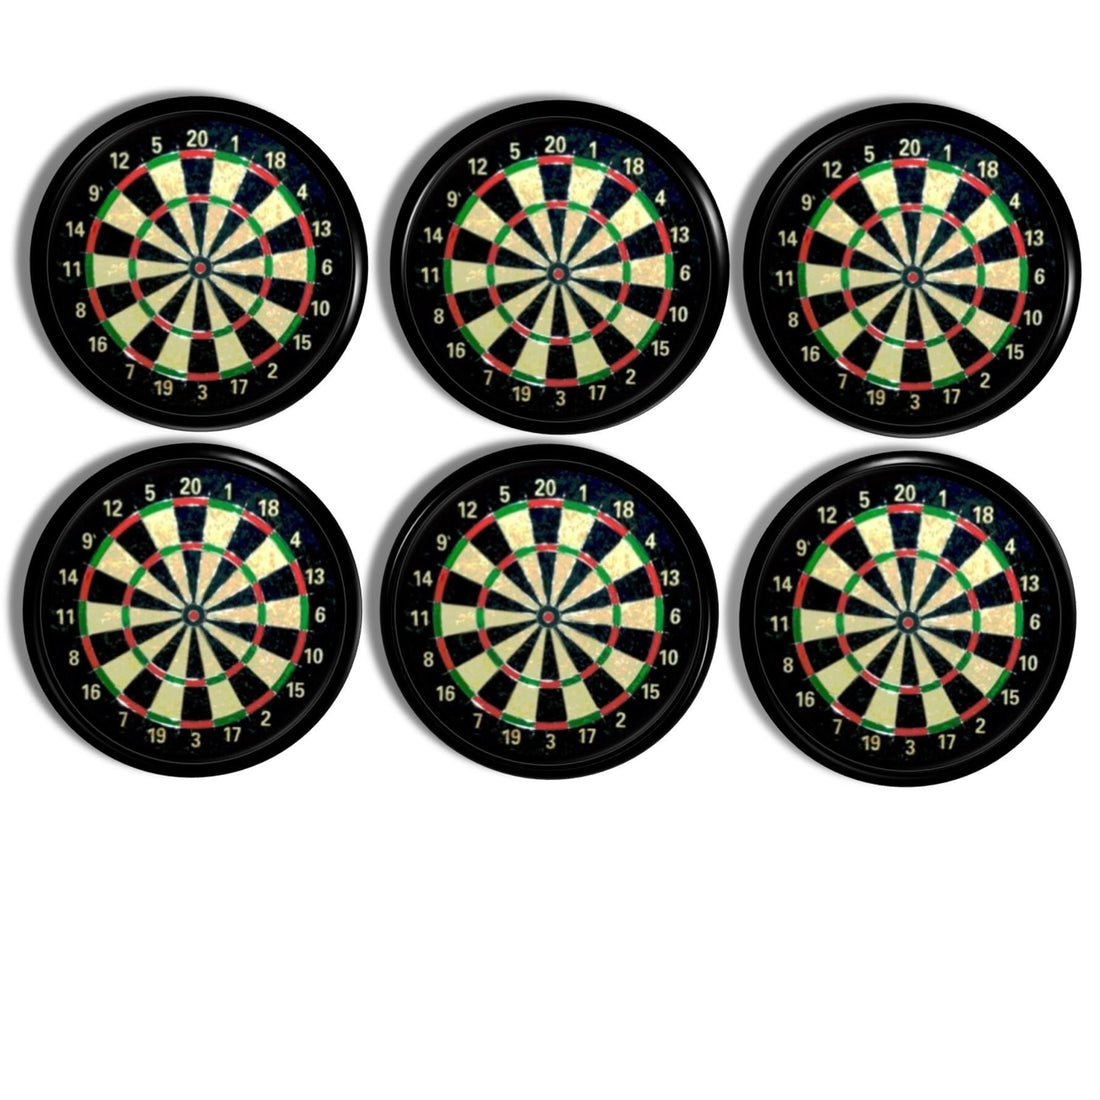 Decorative dart game theme cabinet knobs for mancave, recreation room or home bar.